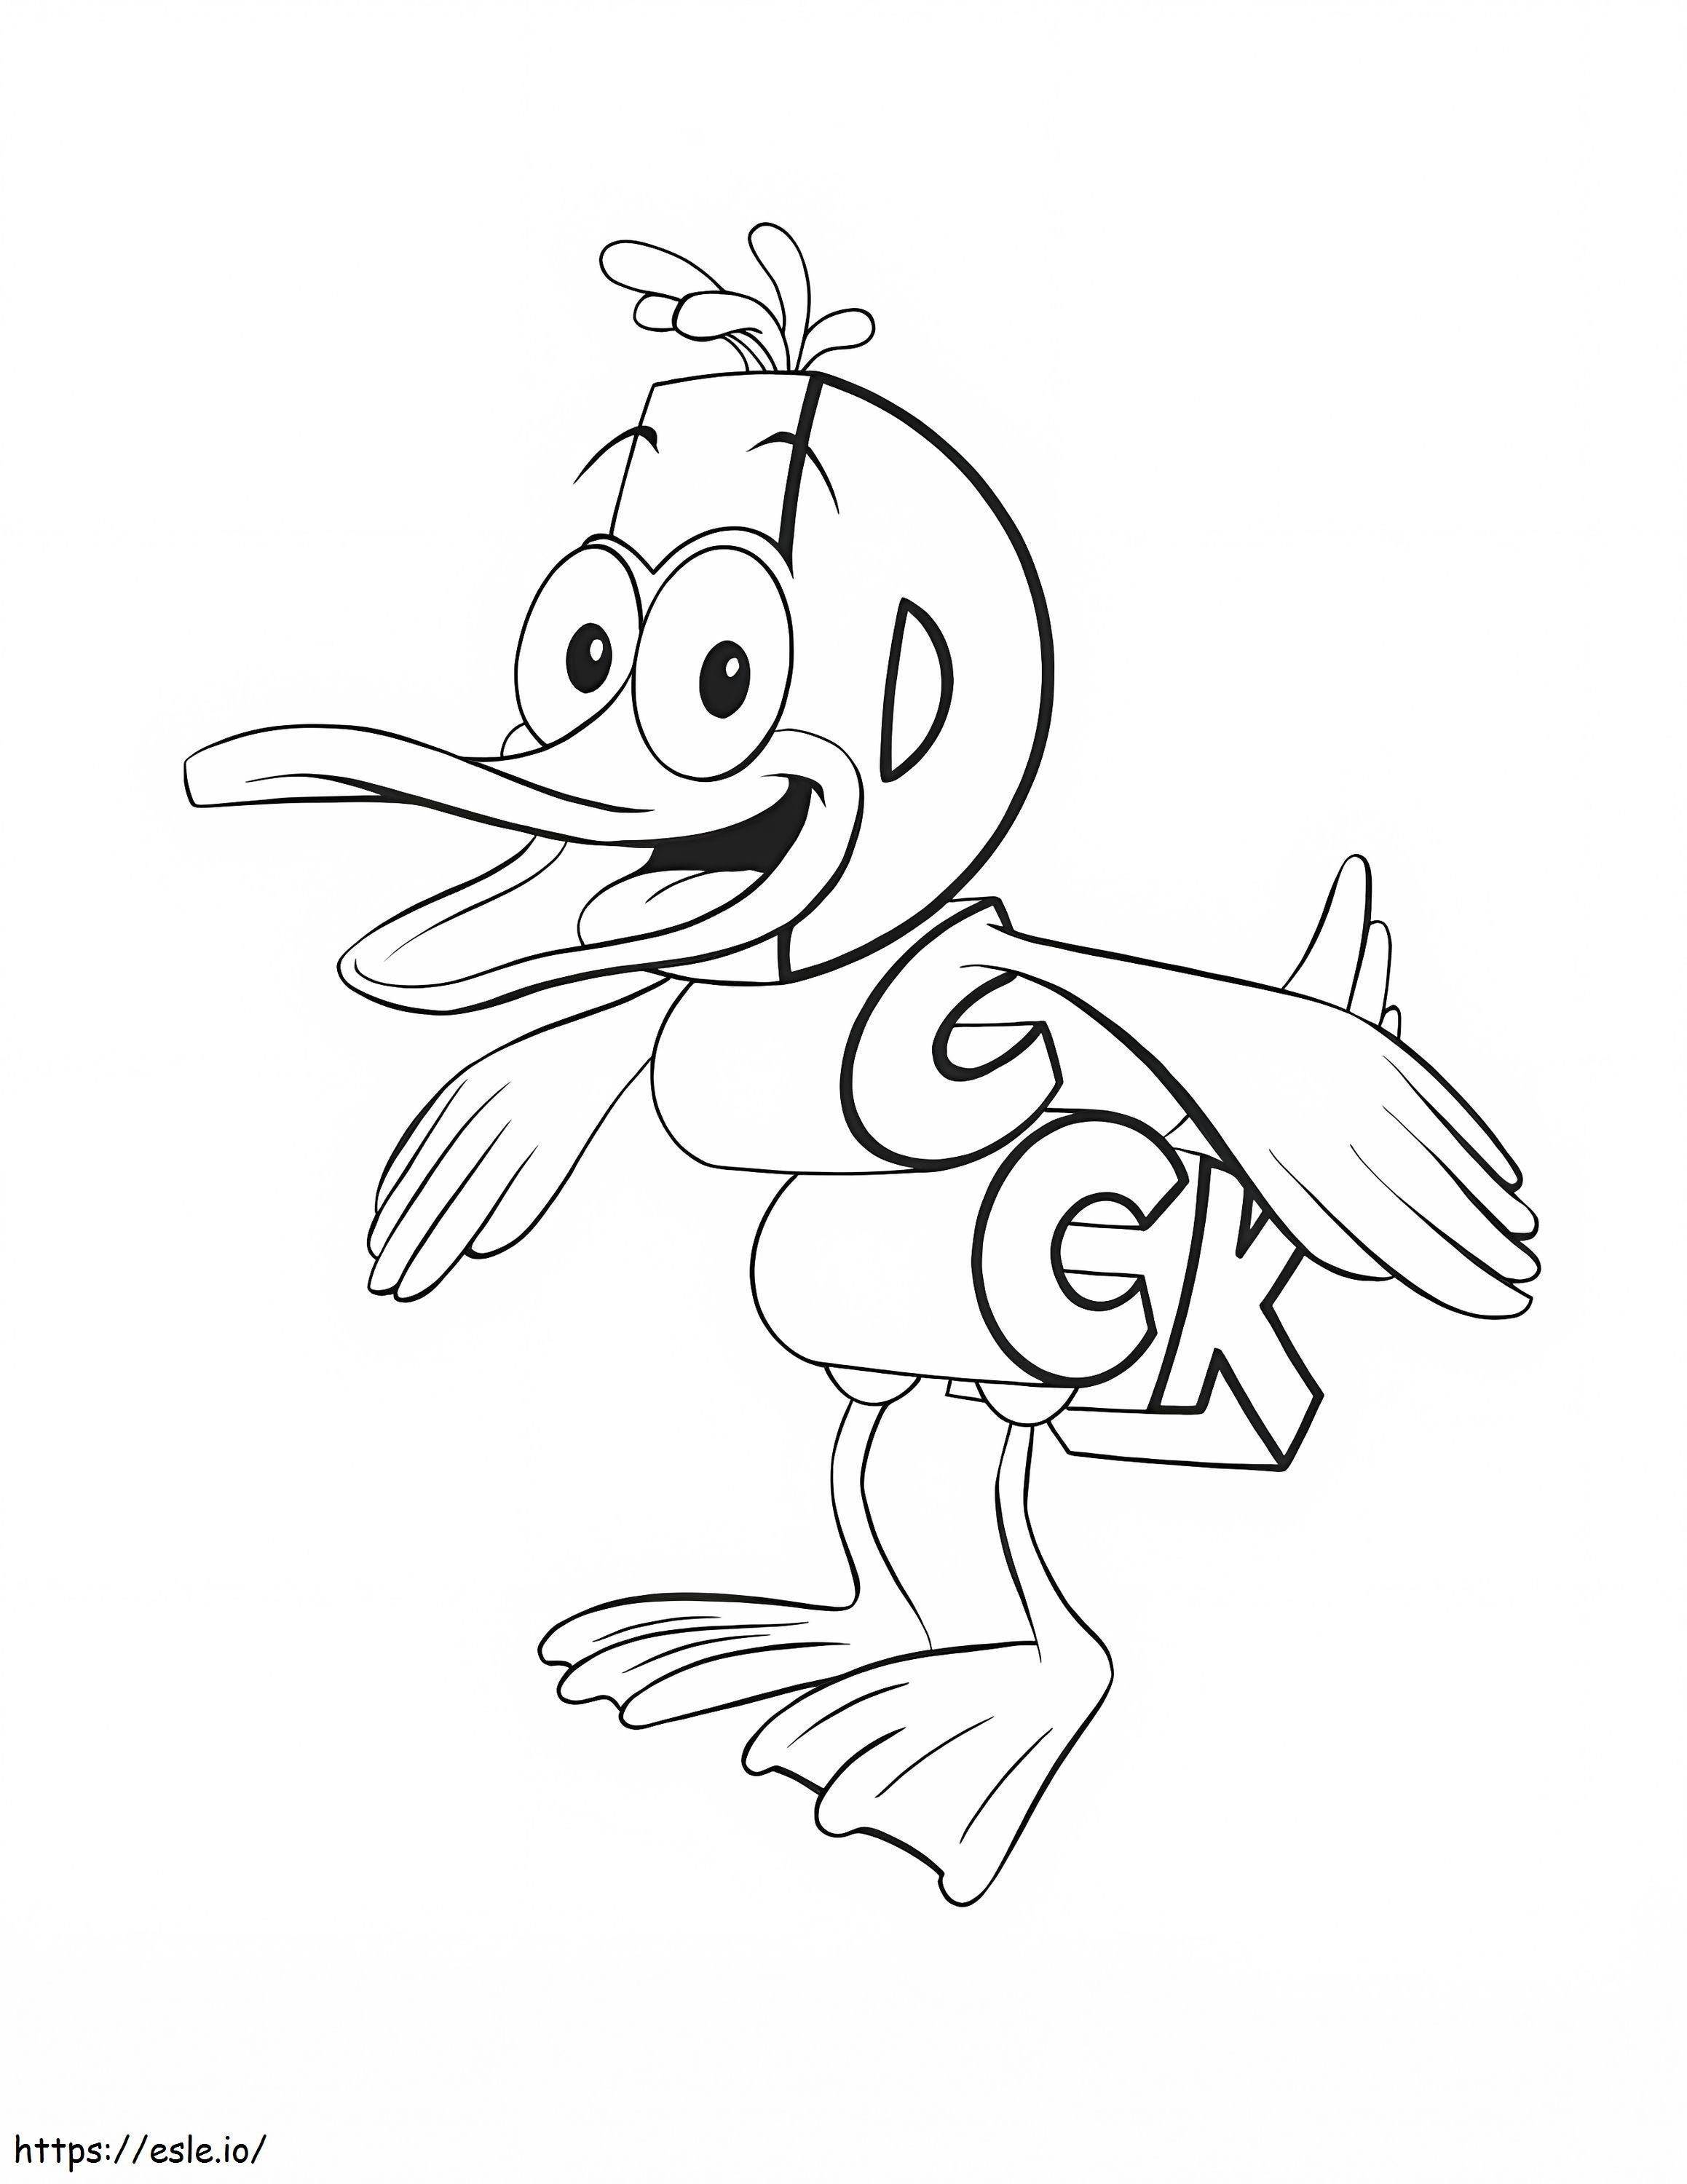 Duck WordWorld Coloring Page coloring page